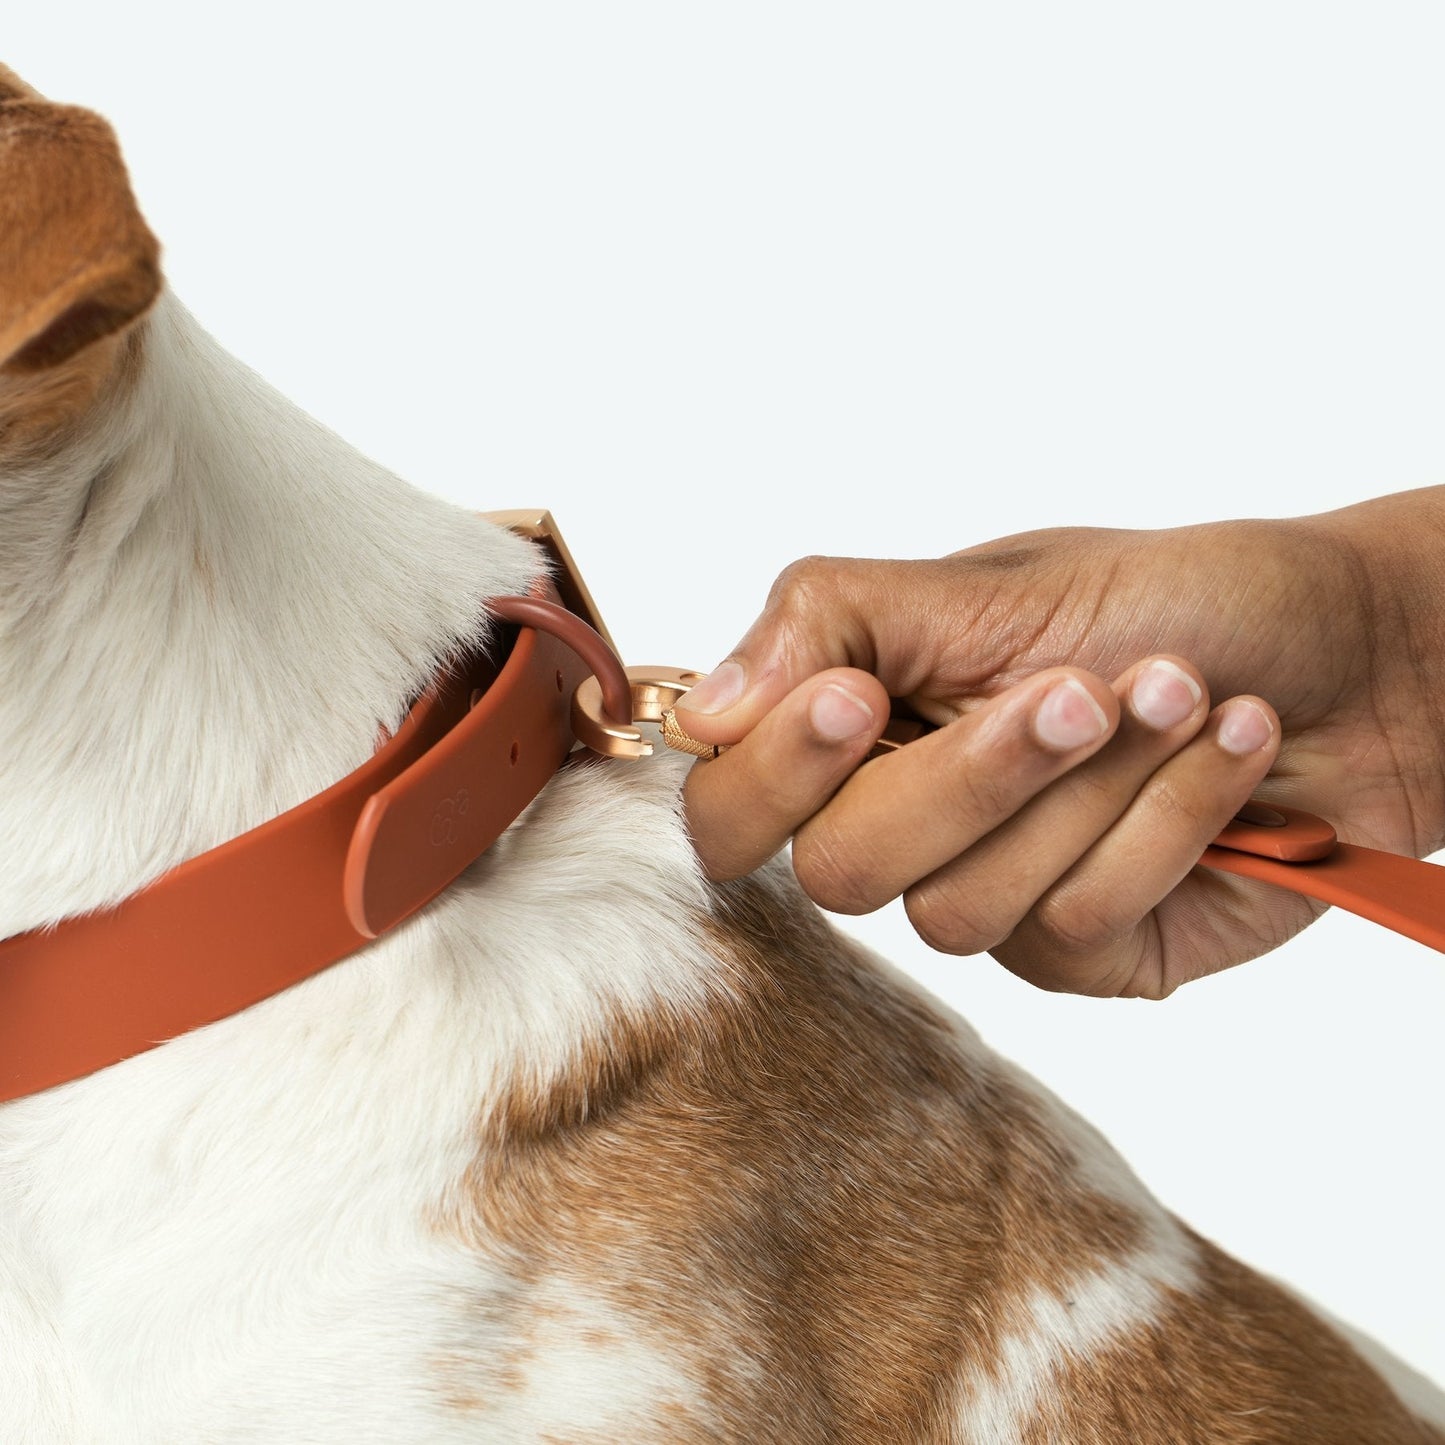 Water-proof, easy to clean, PVC/biothane dog collar by Lucy & Co.